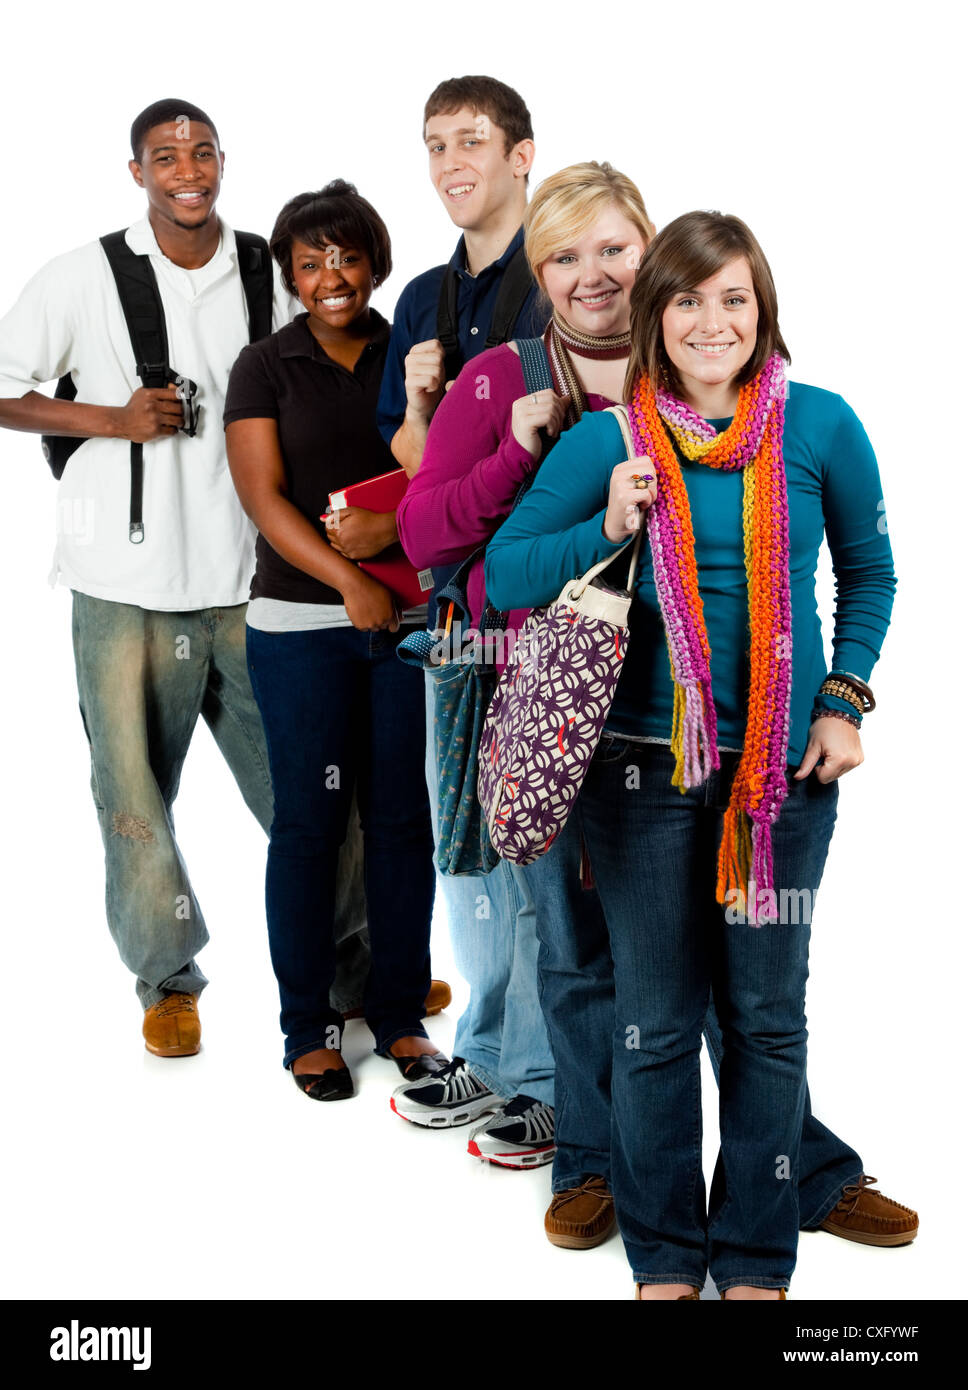 A group of happy multi-racial college students holding backpacks on a white background Stock Photo